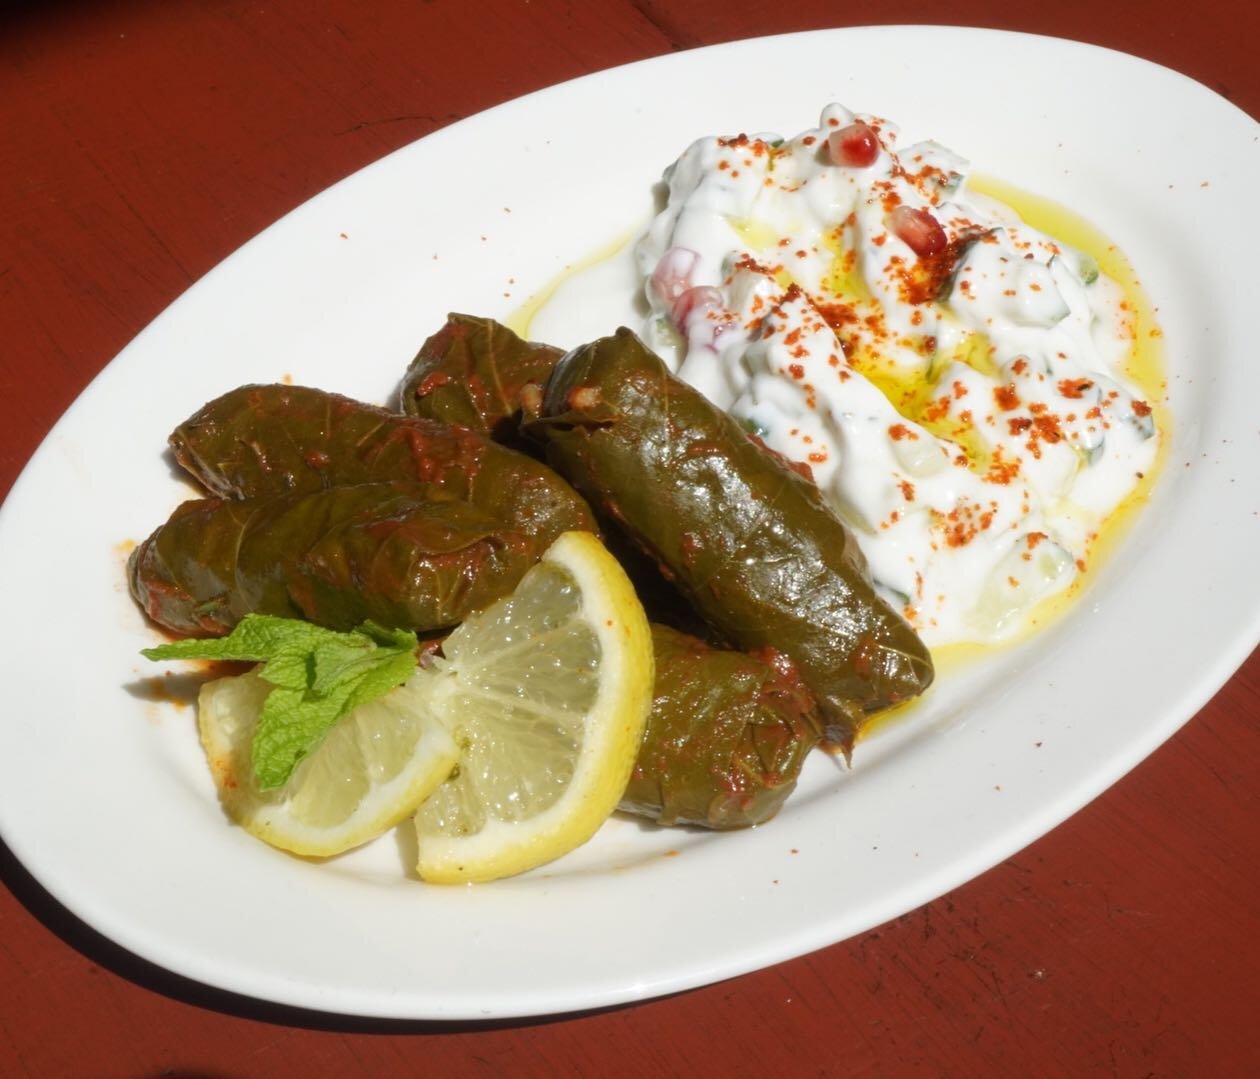 ☀️Stuffed-vine leaves sound like the perfect dish for a light snack on a hot sunny day! 
Why not come to @20jakobscafe and try our Armenian dolmas paired with fresh herbs and a yoghurt &amp; cucumber dip! 🥒

#london #londonfood #thingstodoinlondon #